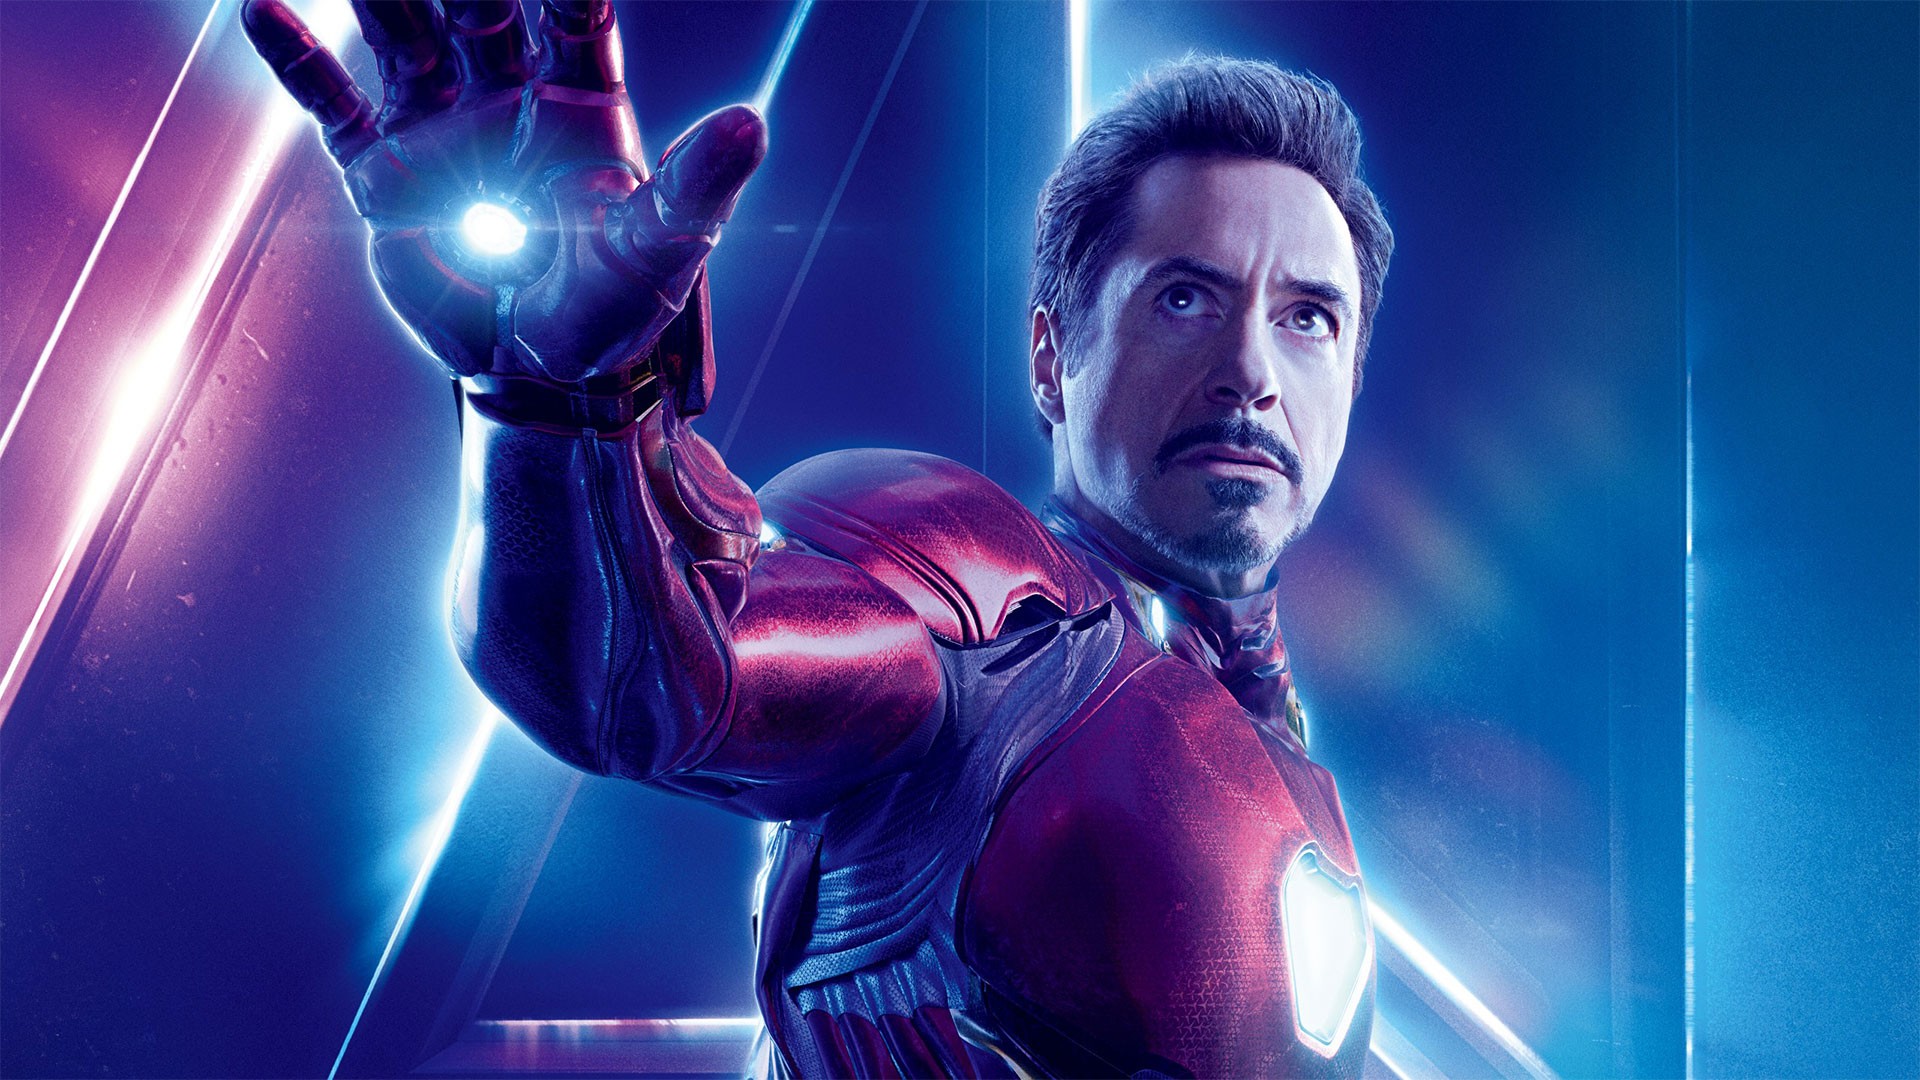 Iron Man Avengers Endgame Wallpaper HD with high-resolution 1920x1080 pixel. You can use this poster wallpaper for your Desktop Computers, Mac Screensavers, Windows Backgrounds, iPhone Wallpapers, Tablet or Android Lock screen and another Mobile device